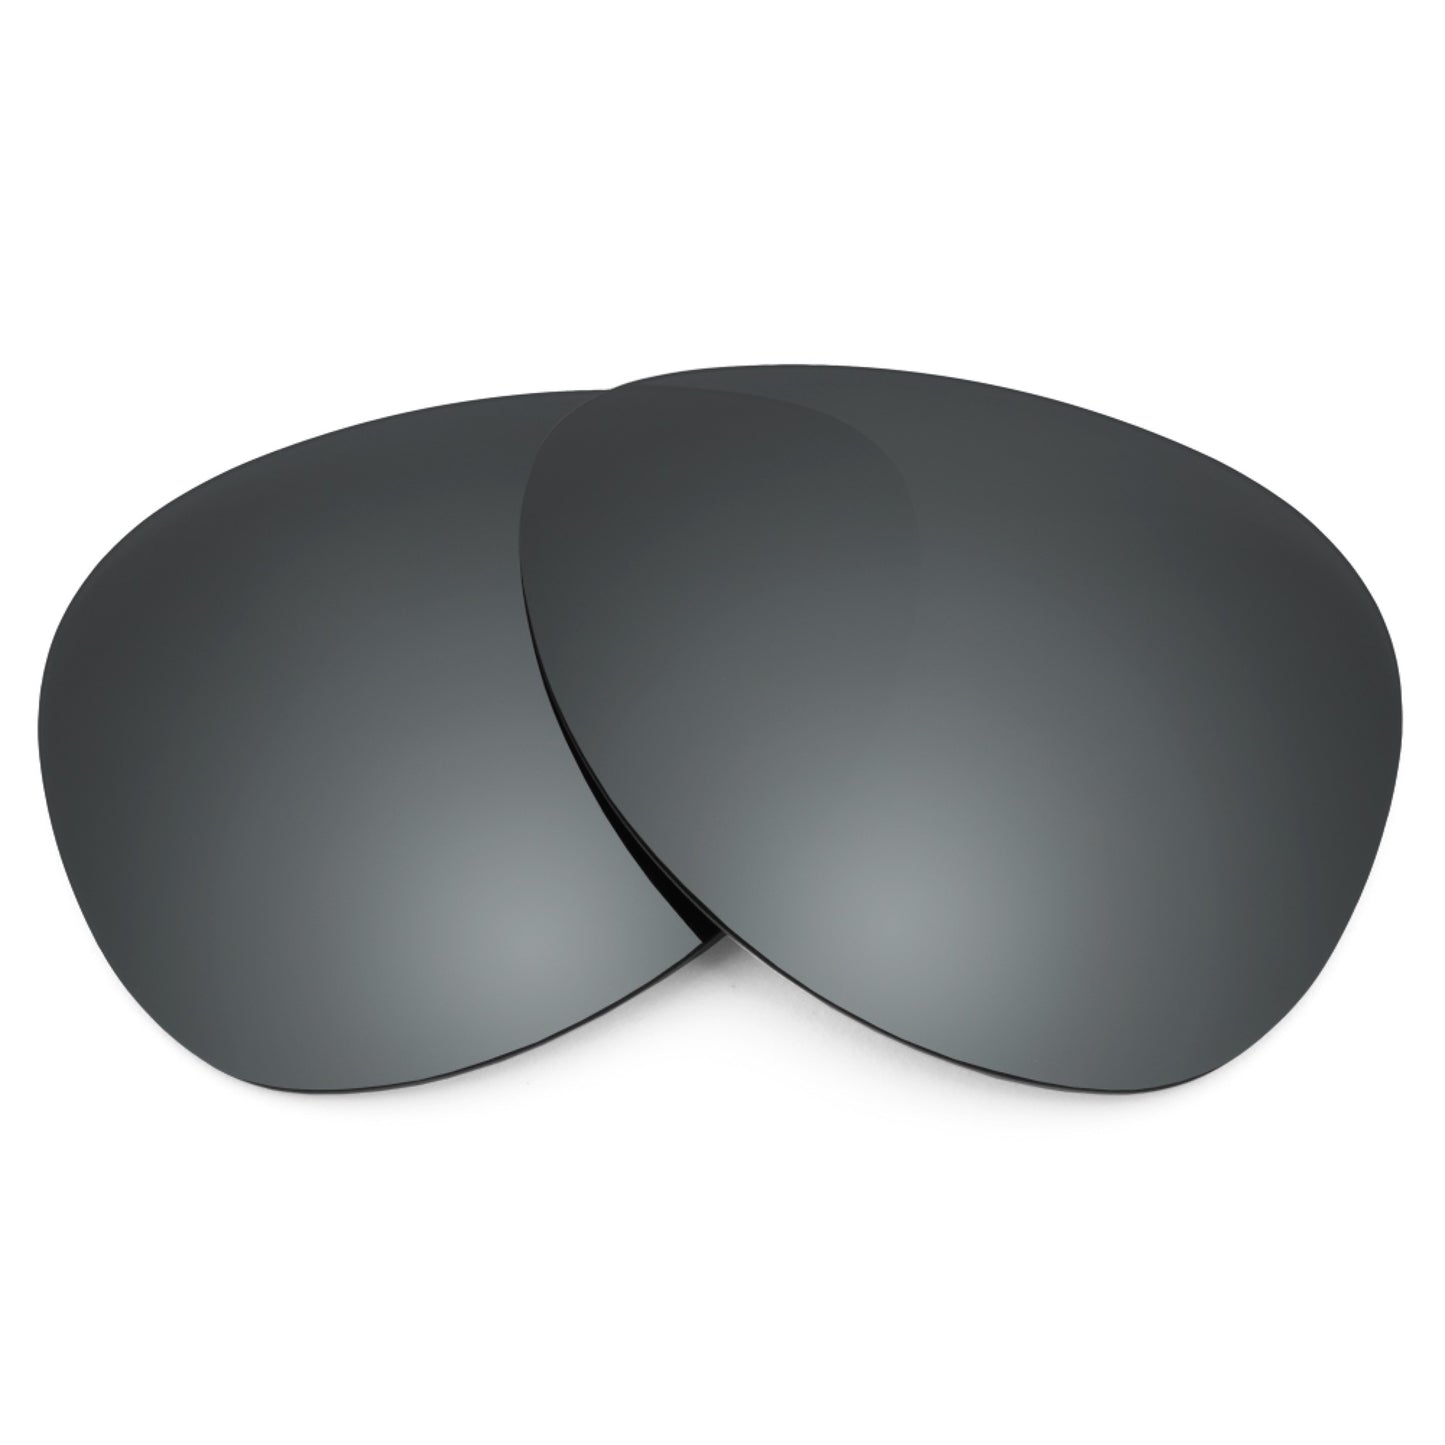 Revant replacement lenses for Ray-Ban Cats 1000 RB4126 57mm Non-Polarized Black Chrome